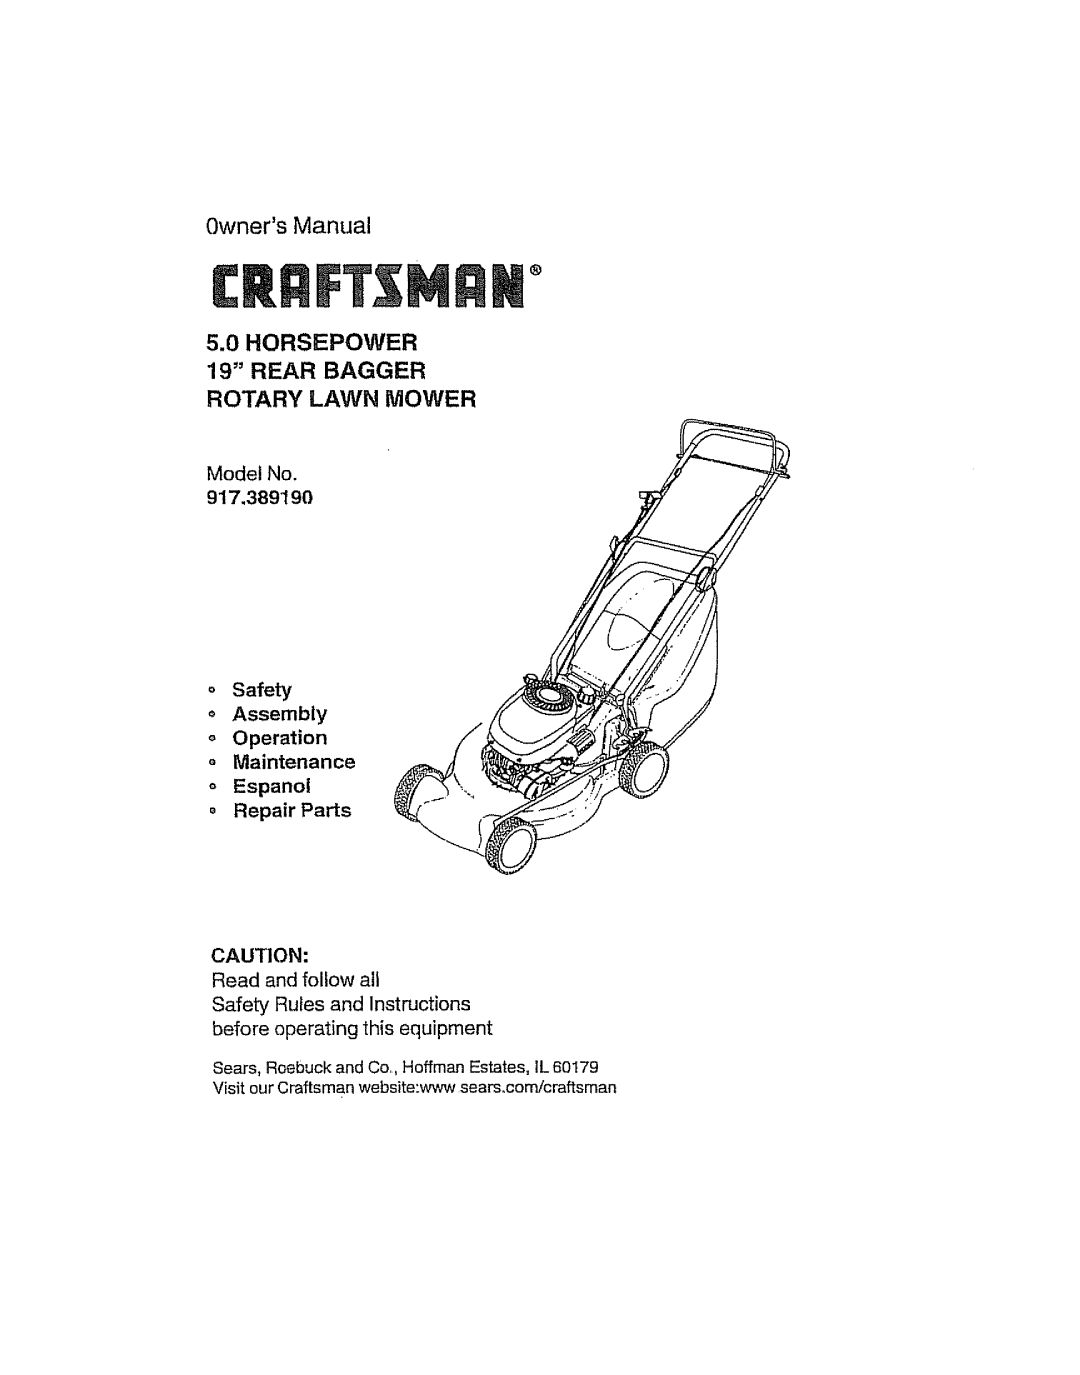 Craftsman 917.38919 owner manual oSafety Assembly, Operation, oMaintenance, oEspanol, Repair Parts, OwnersManual, Model No 